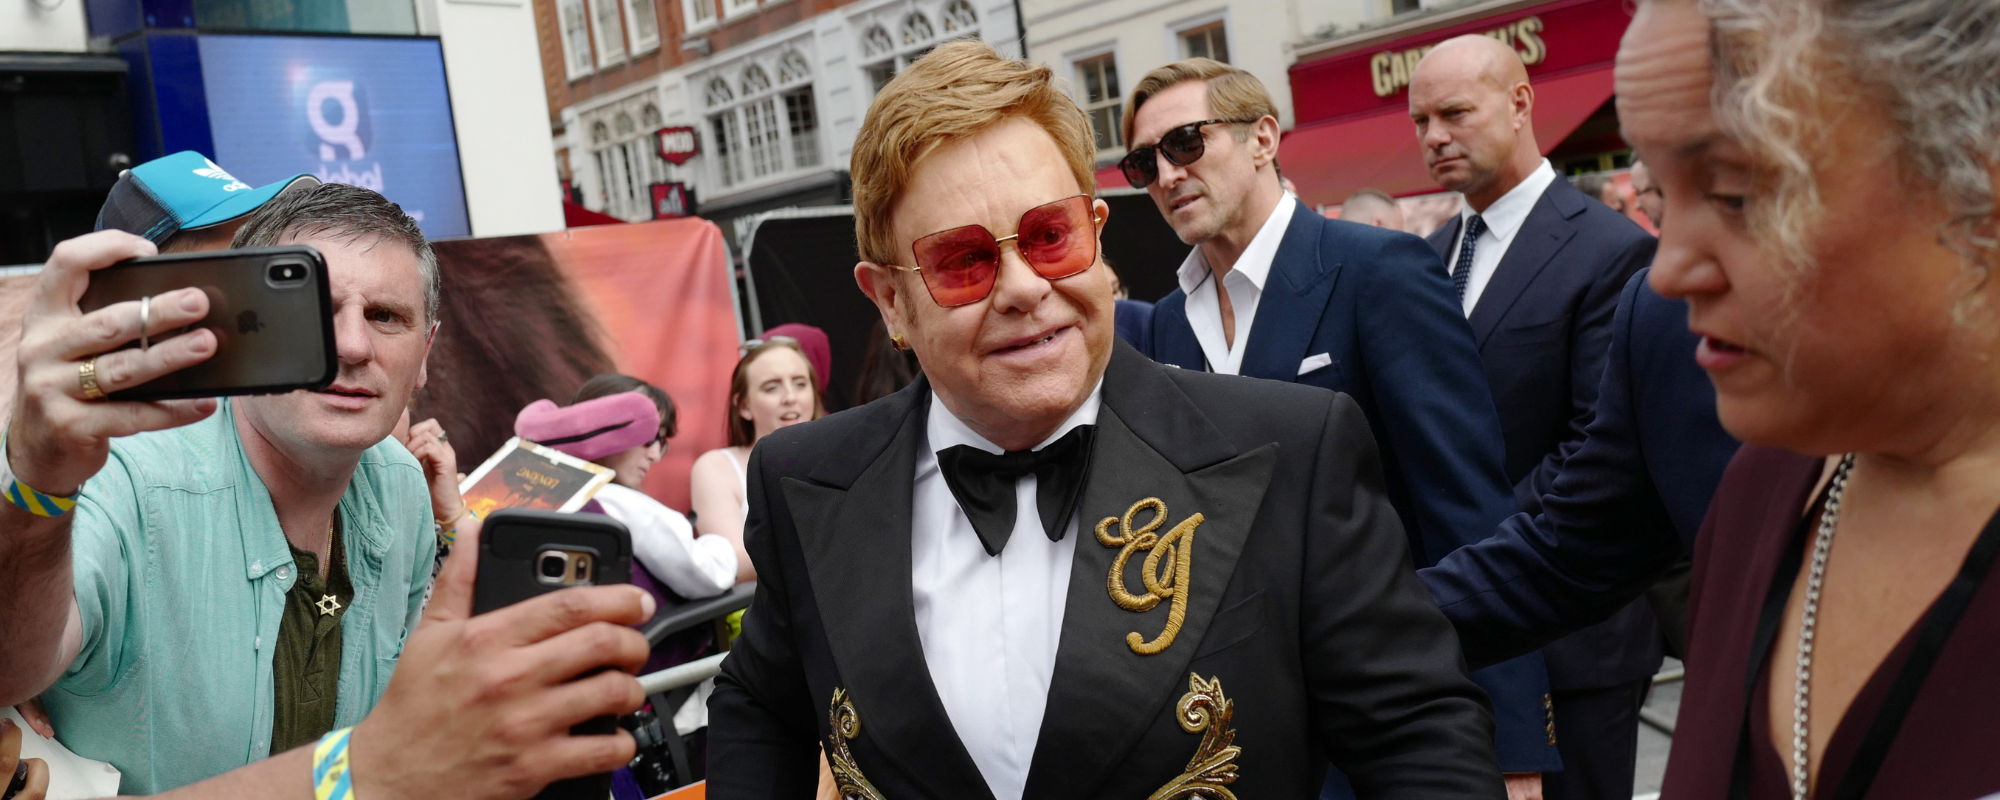 5 Elton John Hit Singles Not Written with Bernie Taupin (and There Are Some Big Ones!)